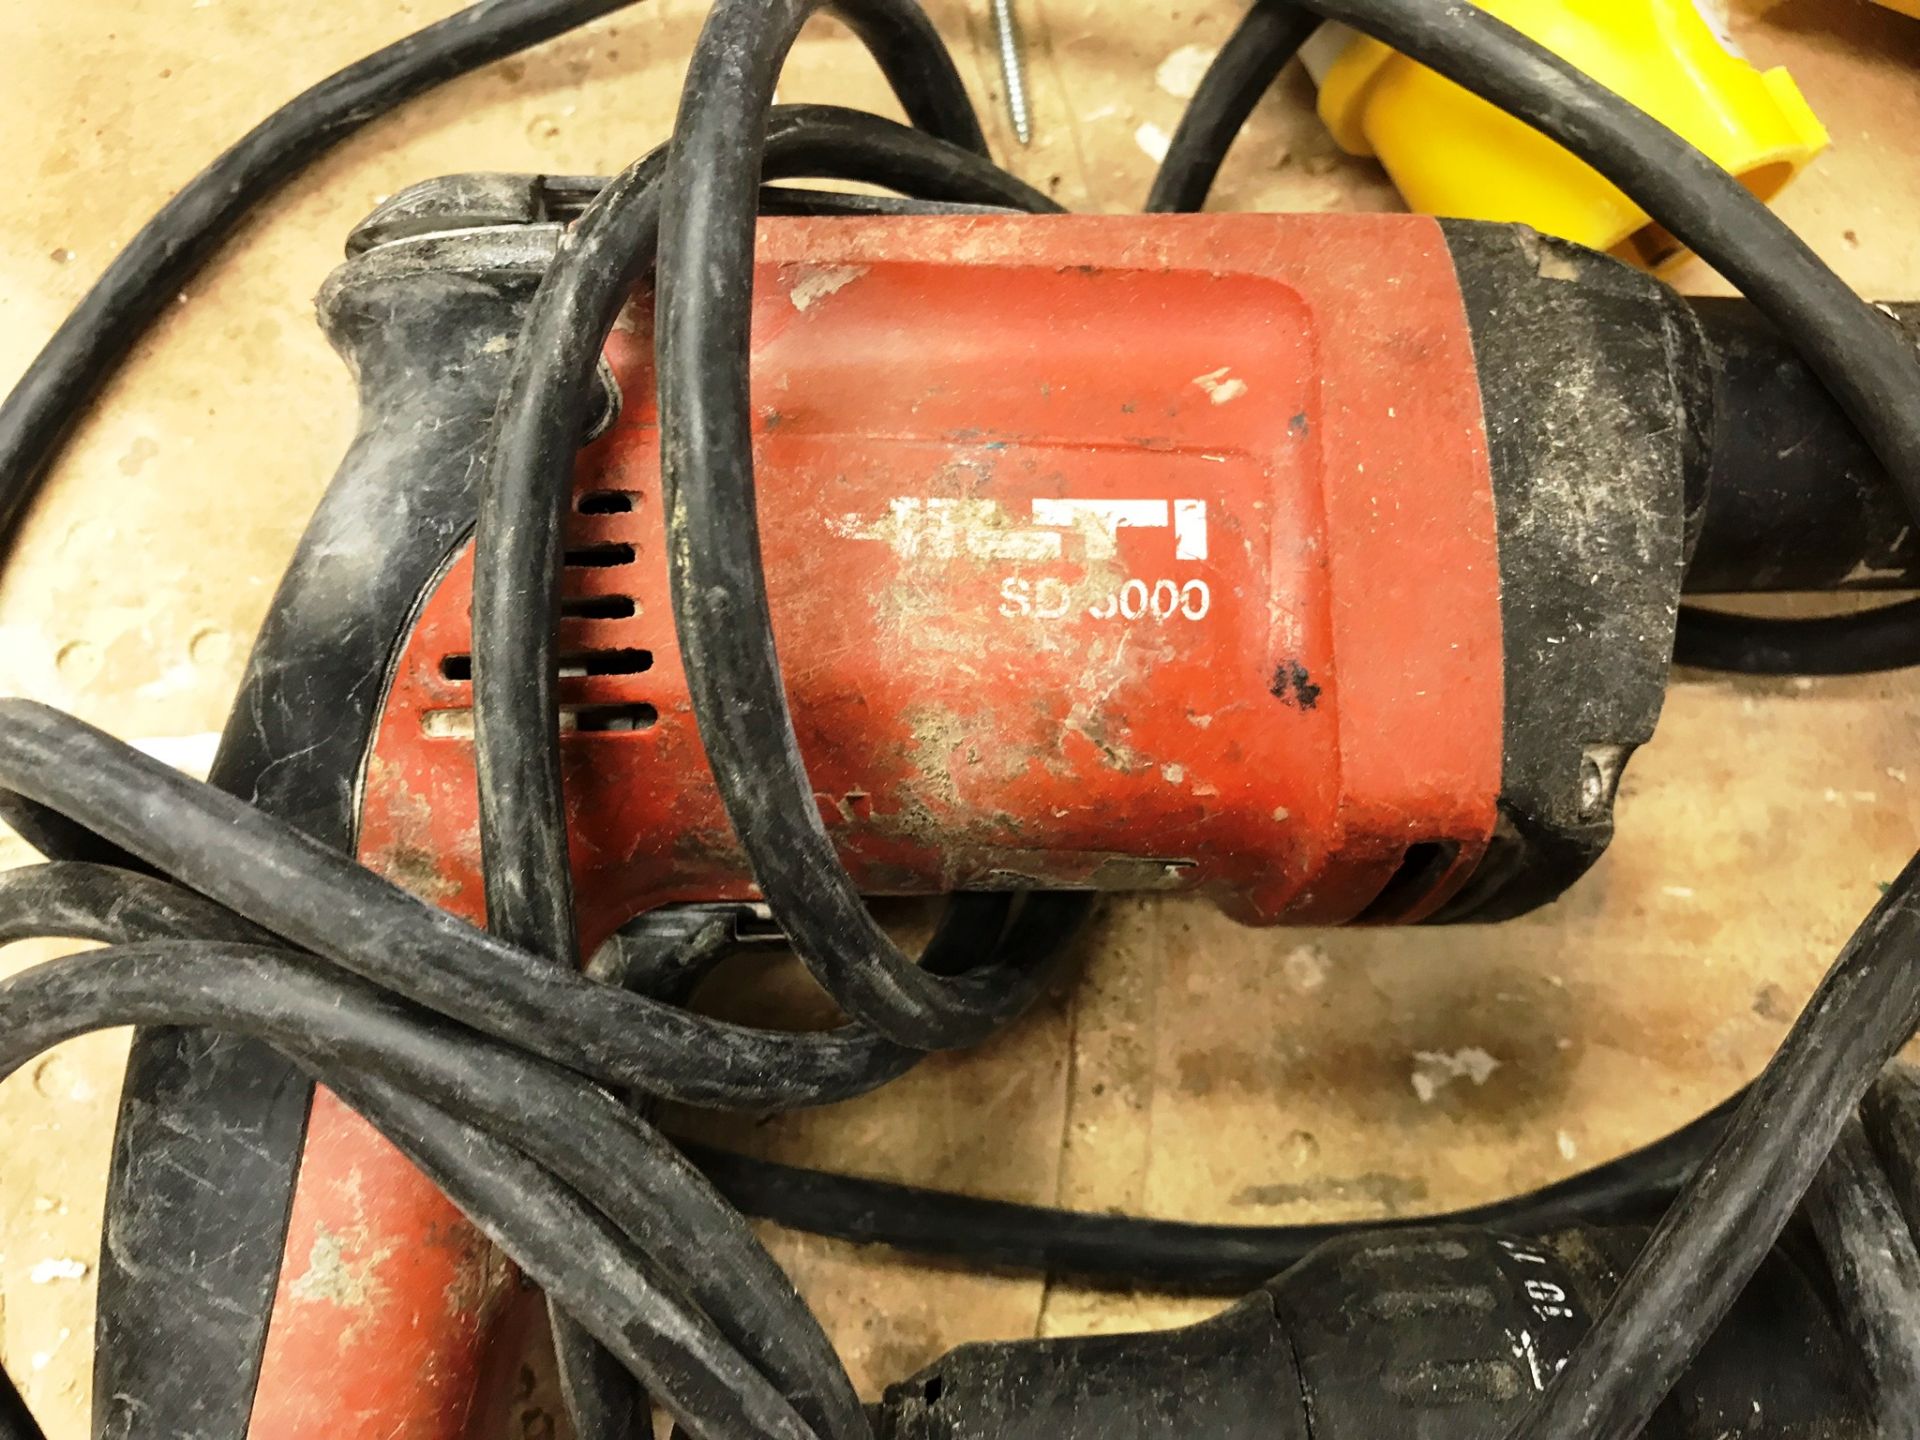 2 x Various Hilti Power Tools 110V - As pictured - Image 2 of 4